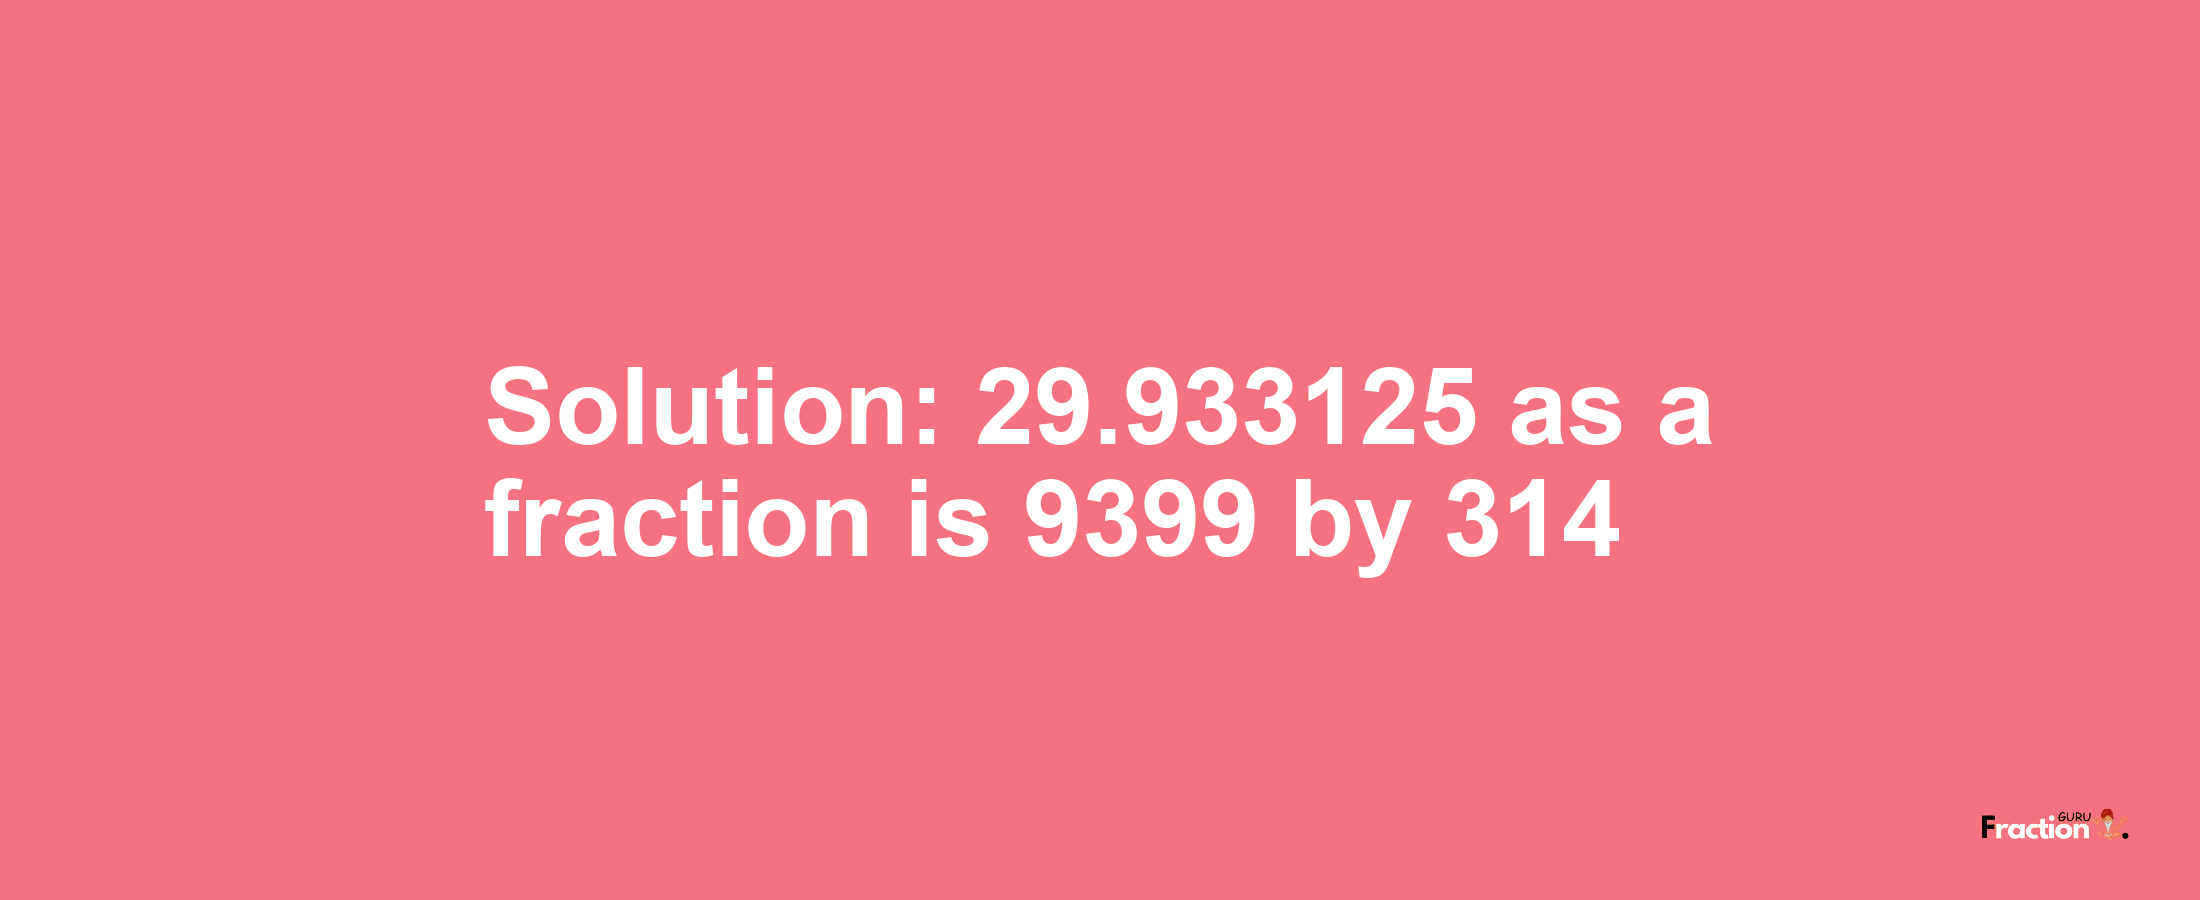 Solution:29.933125 as a fraction is 9399/314